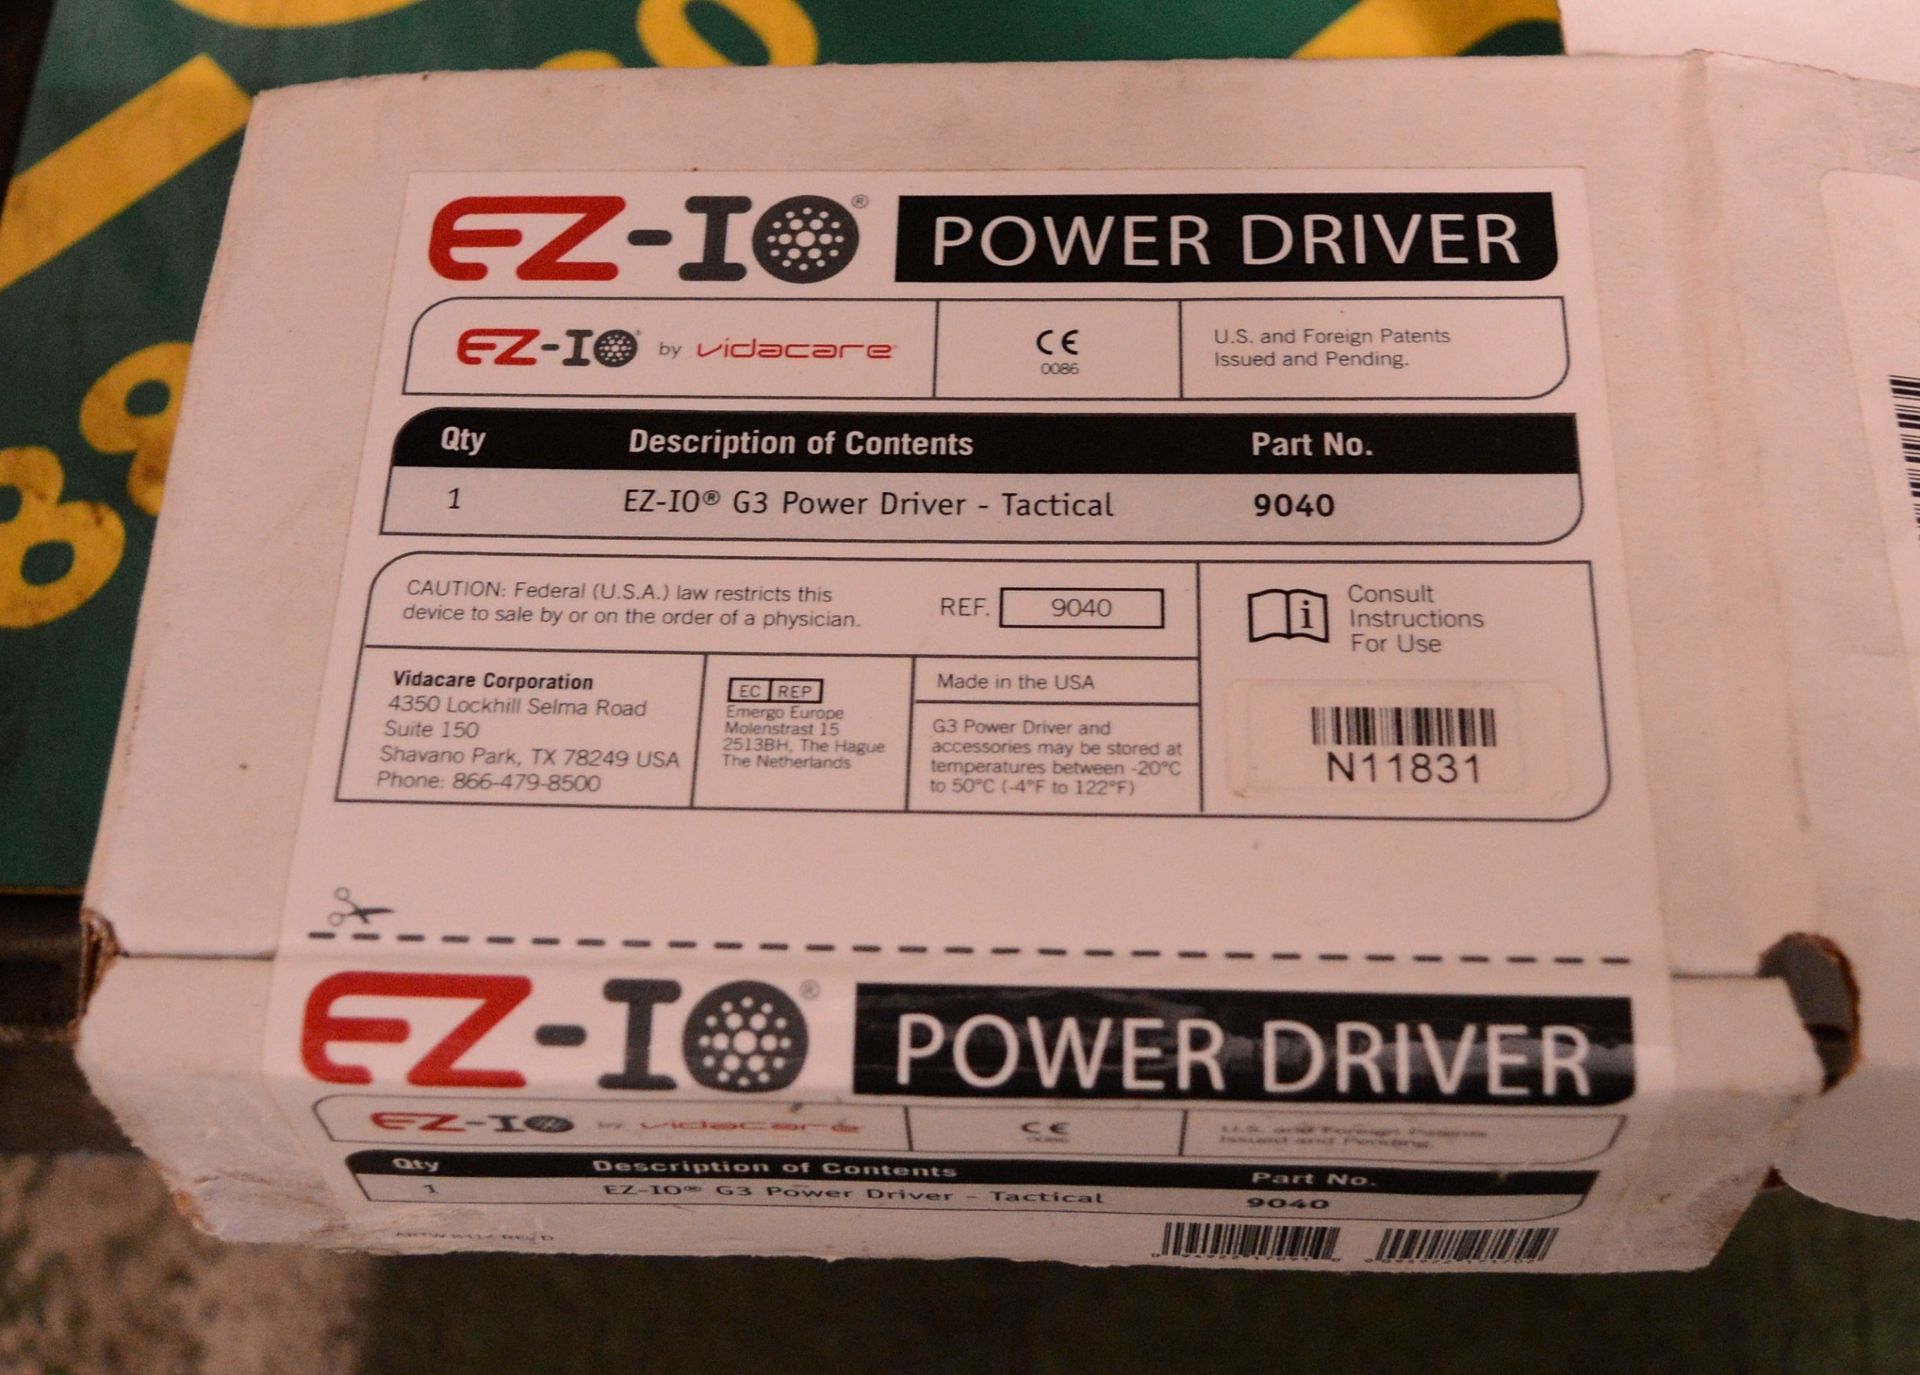 EZ-IO G3 Power Drivers-Tactical - Image 2 of 2